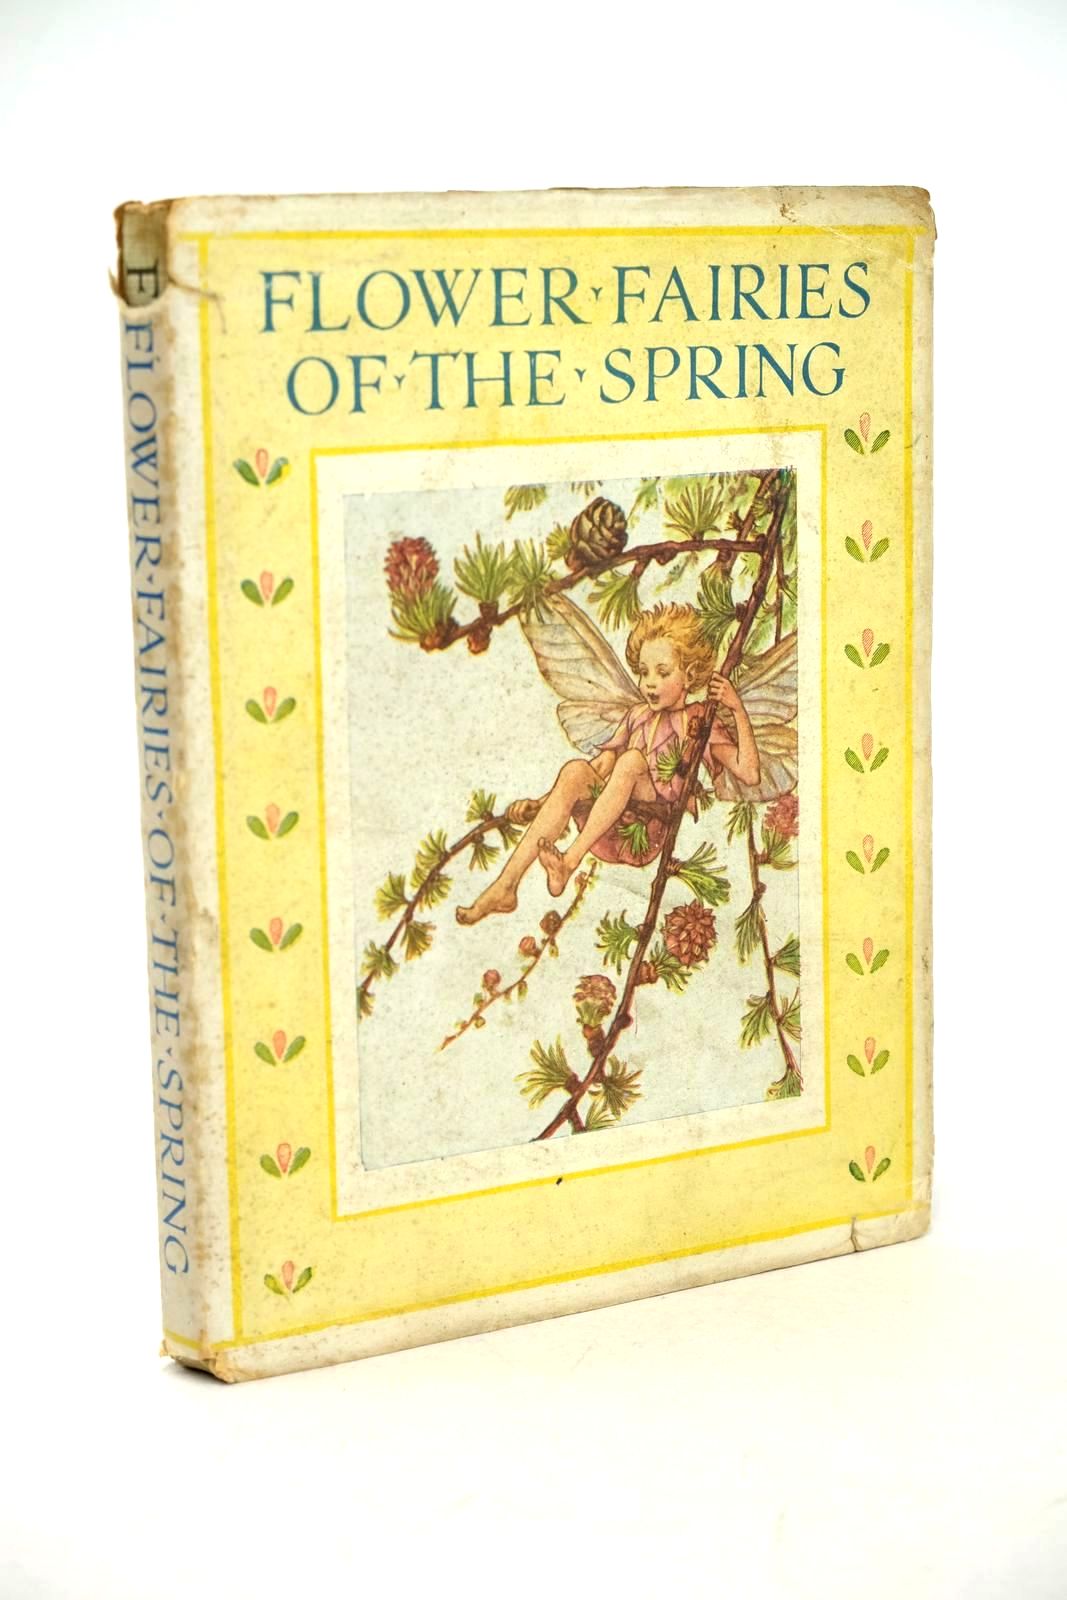 Photo of FLOWER FAIRIES OF THE SPRING written by Barker, Cicely Mary illustrated by Barker, Cicely Mary published by Blackie &amp; Son Ltd. (STOCK CODE: 1326737)  for sale by Stella & Rose's Books